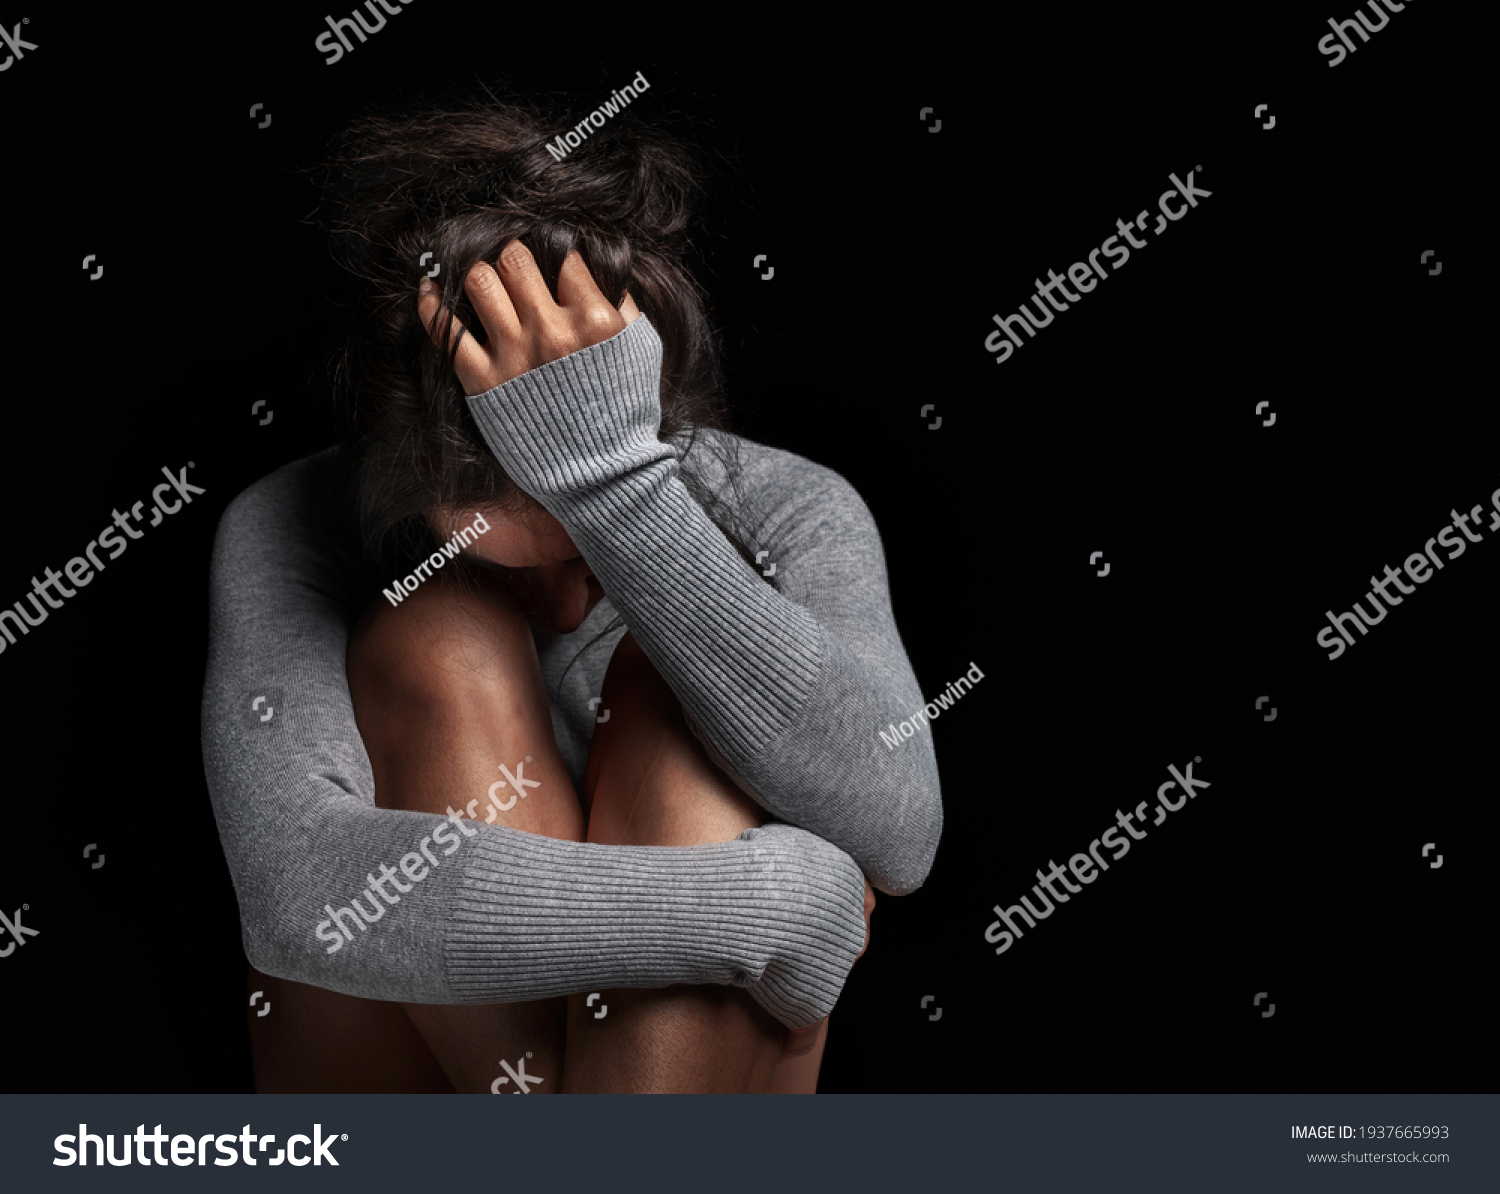 Depression or domestic violence concept: Sad lonely young woman crying while sitting in dark room with an attitude of sadness and boredom with her legs together and hugged. #1937665993